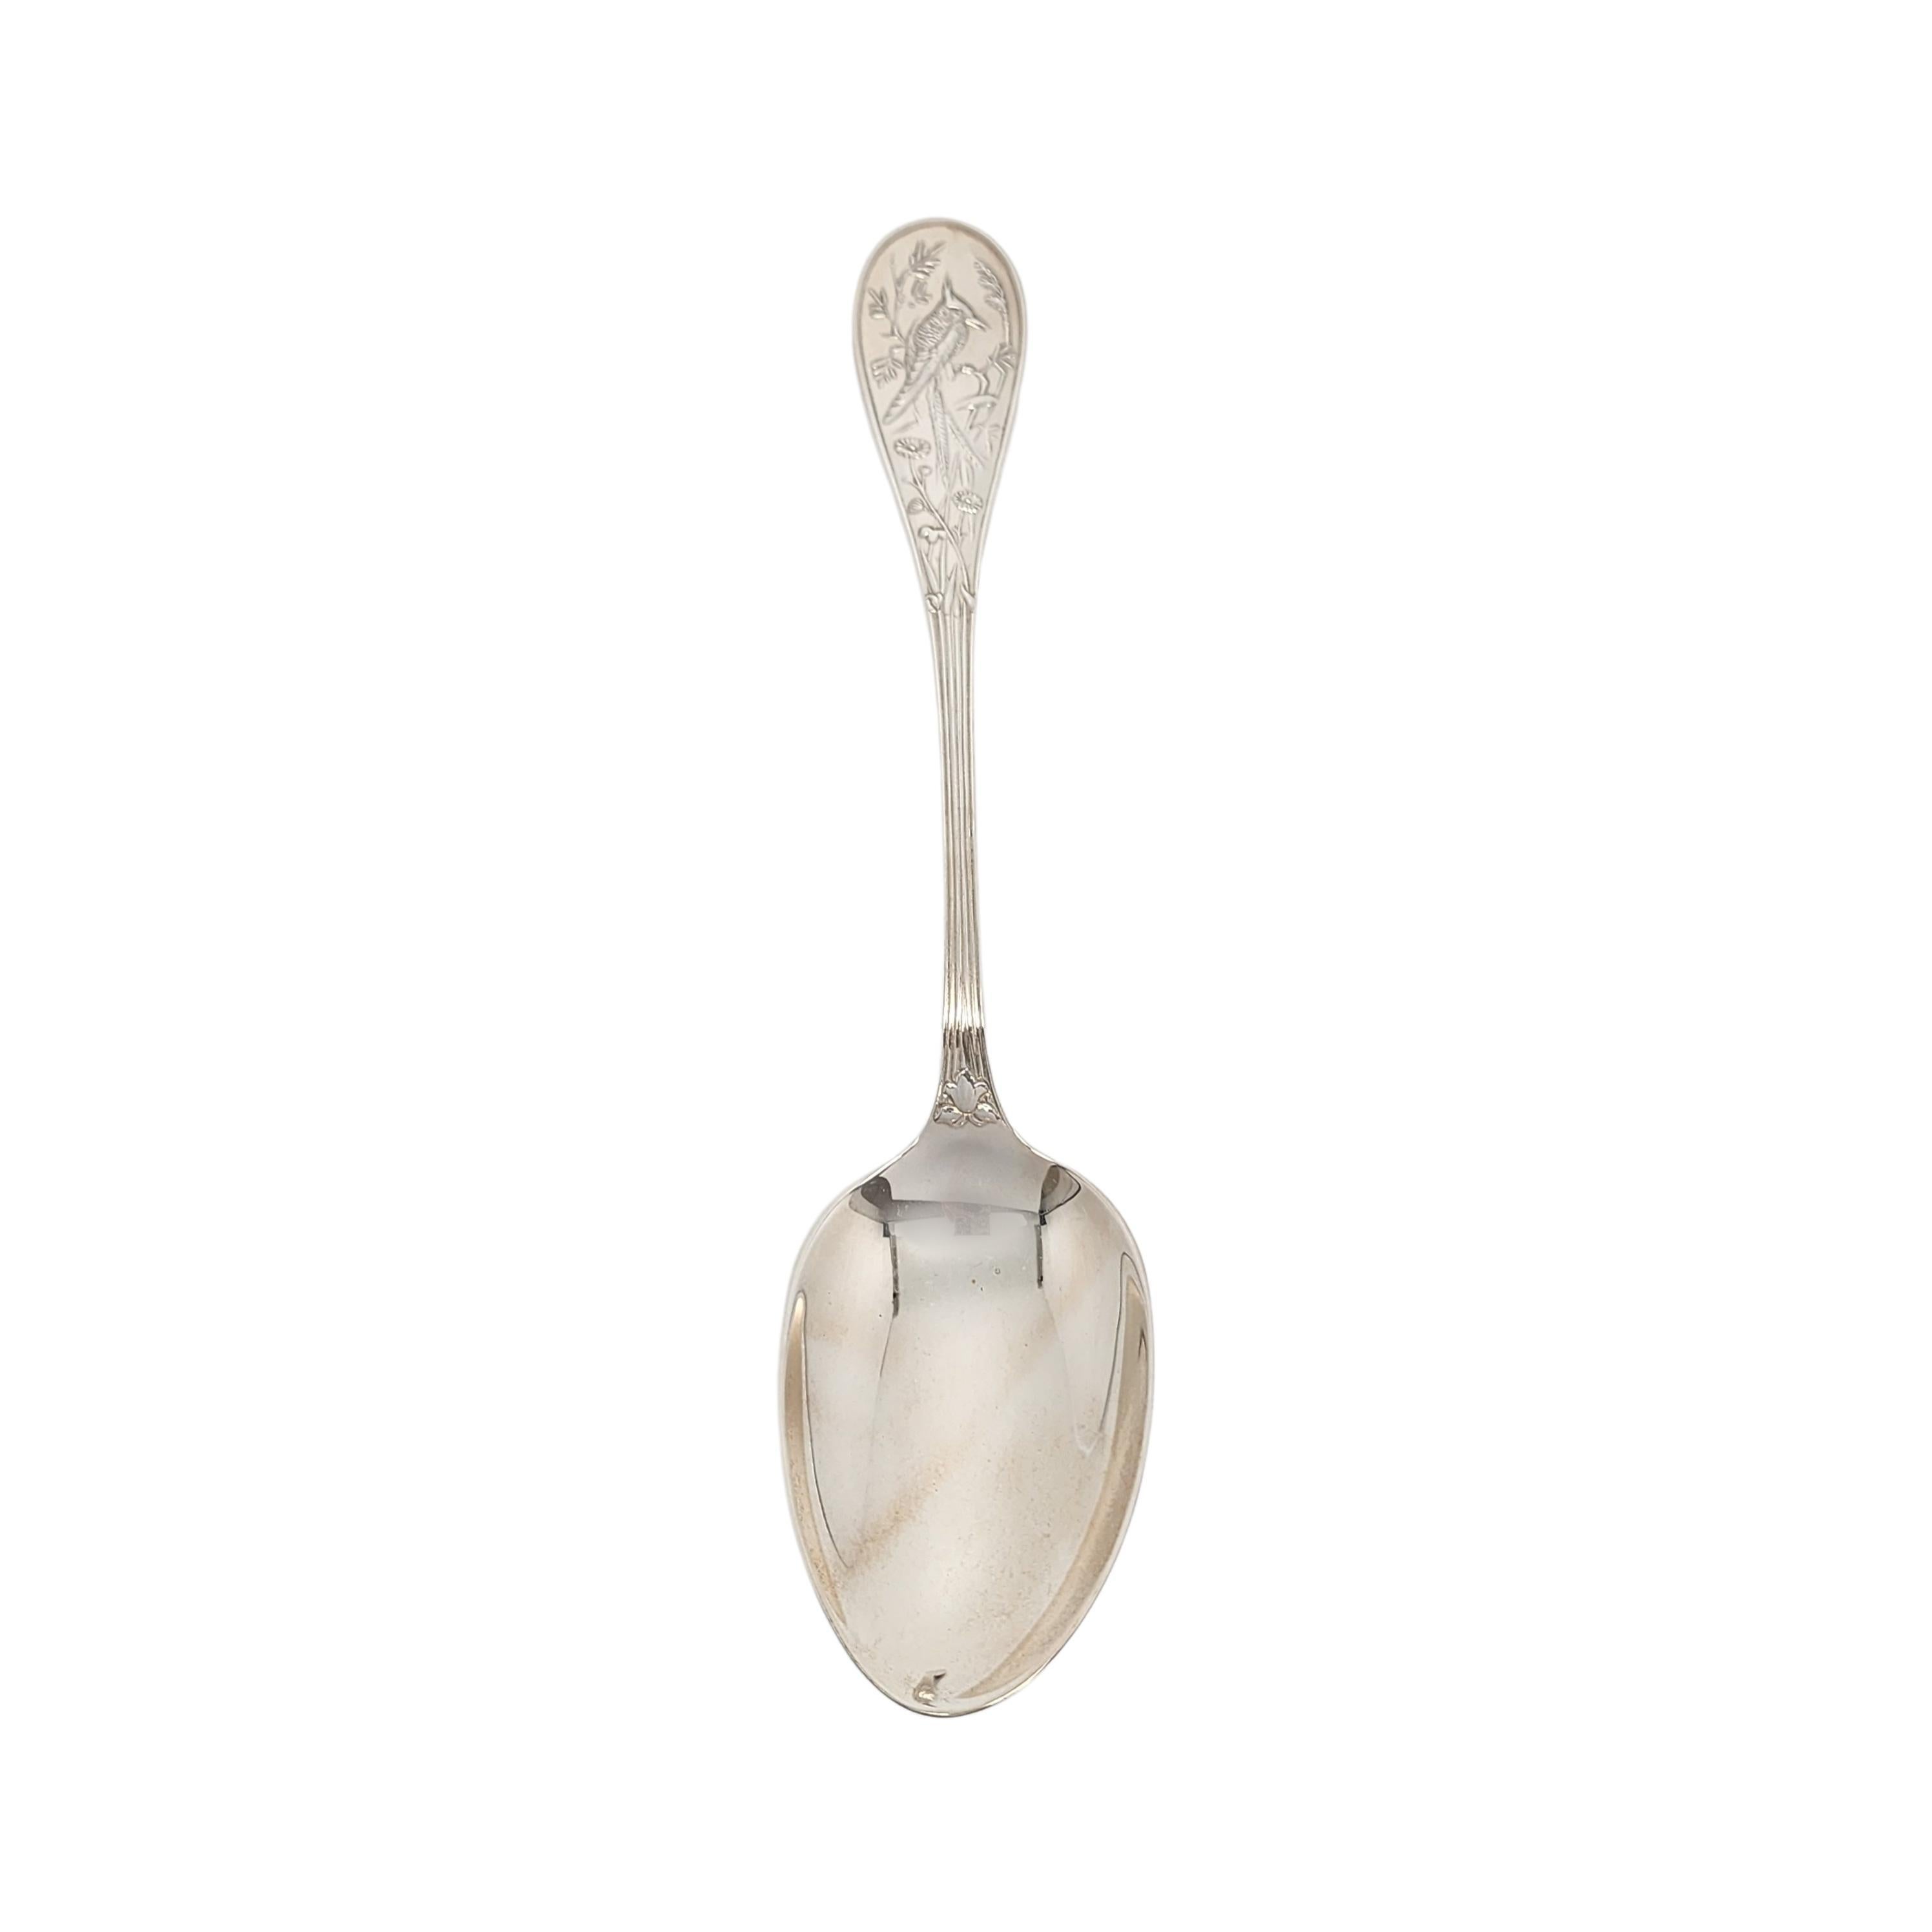 Sterling silver serving tablespoon by Tiffany & Co in the Audubon pattern with pouch.

No monogram

Designed by Edward C. Moore in 1871, the Audubon pattern was inspired by Japanese bird paintings of the 19th century. This spoon is large and